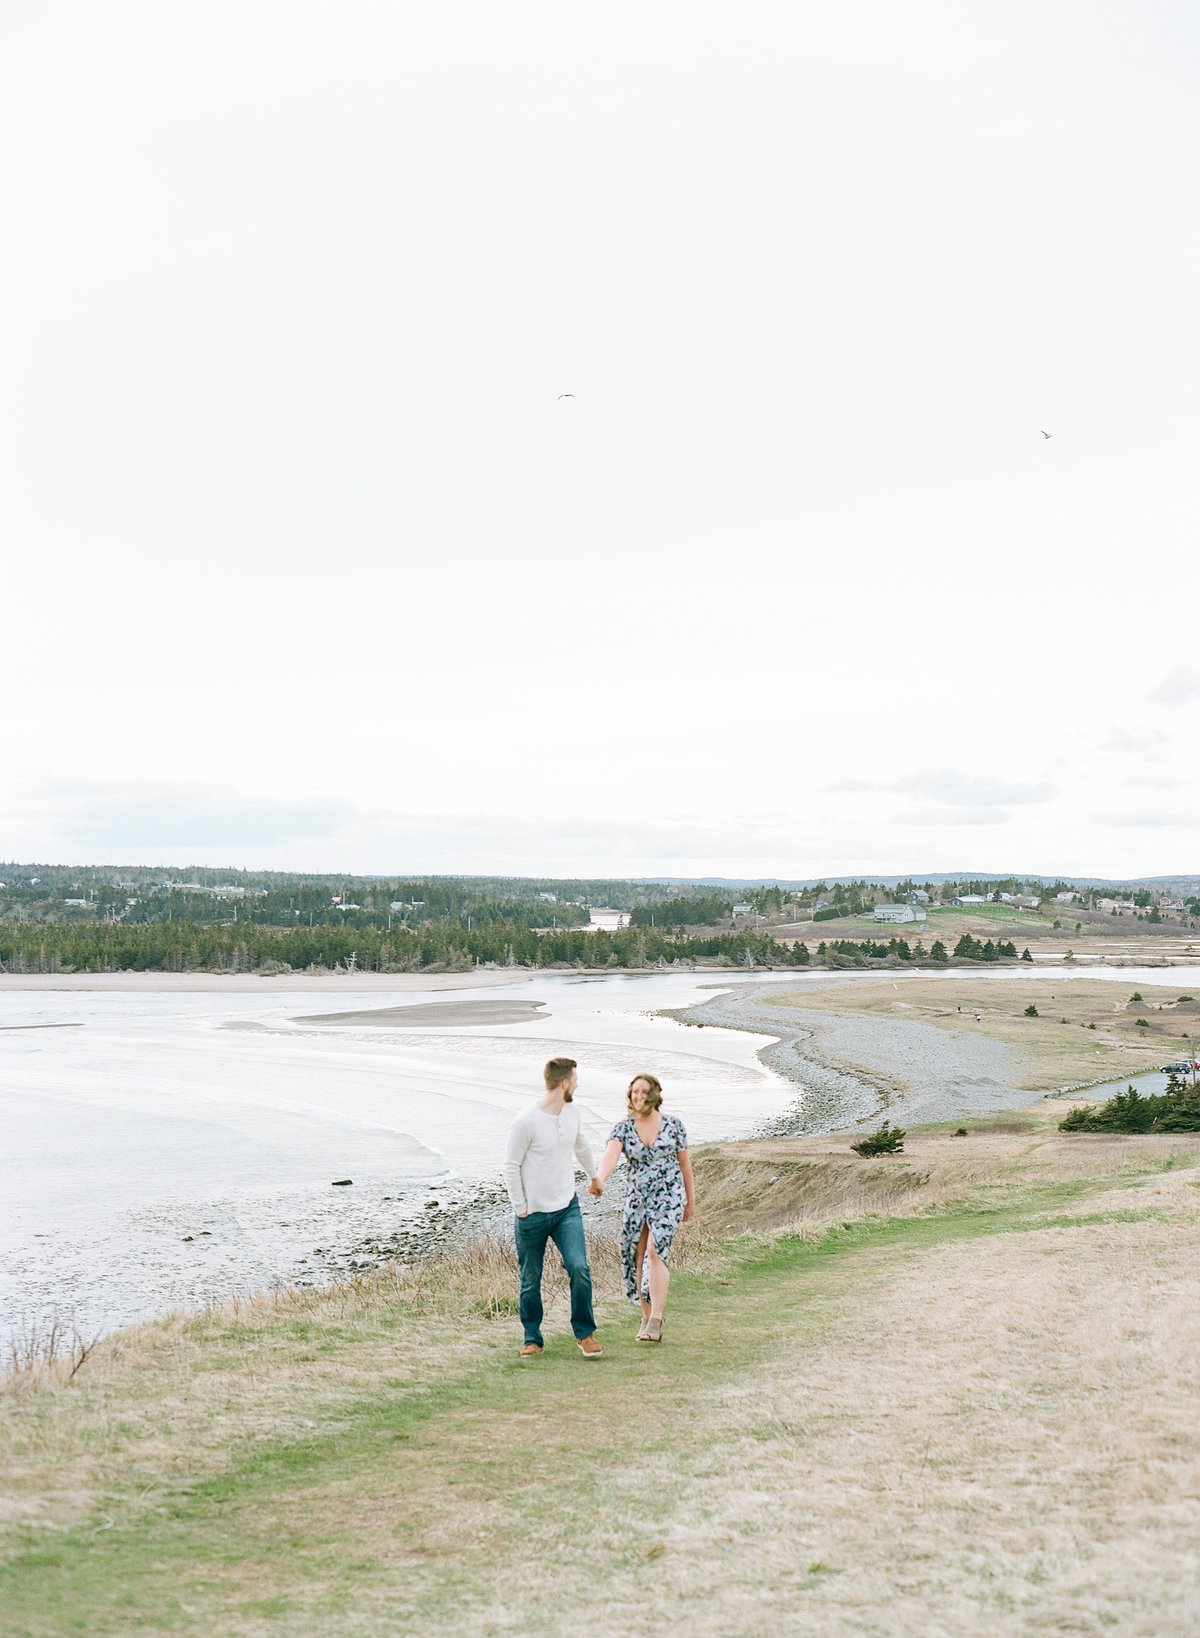 Jacqueline Anne Photography - Akayla and Andrew - Lawrencetown Beach-75